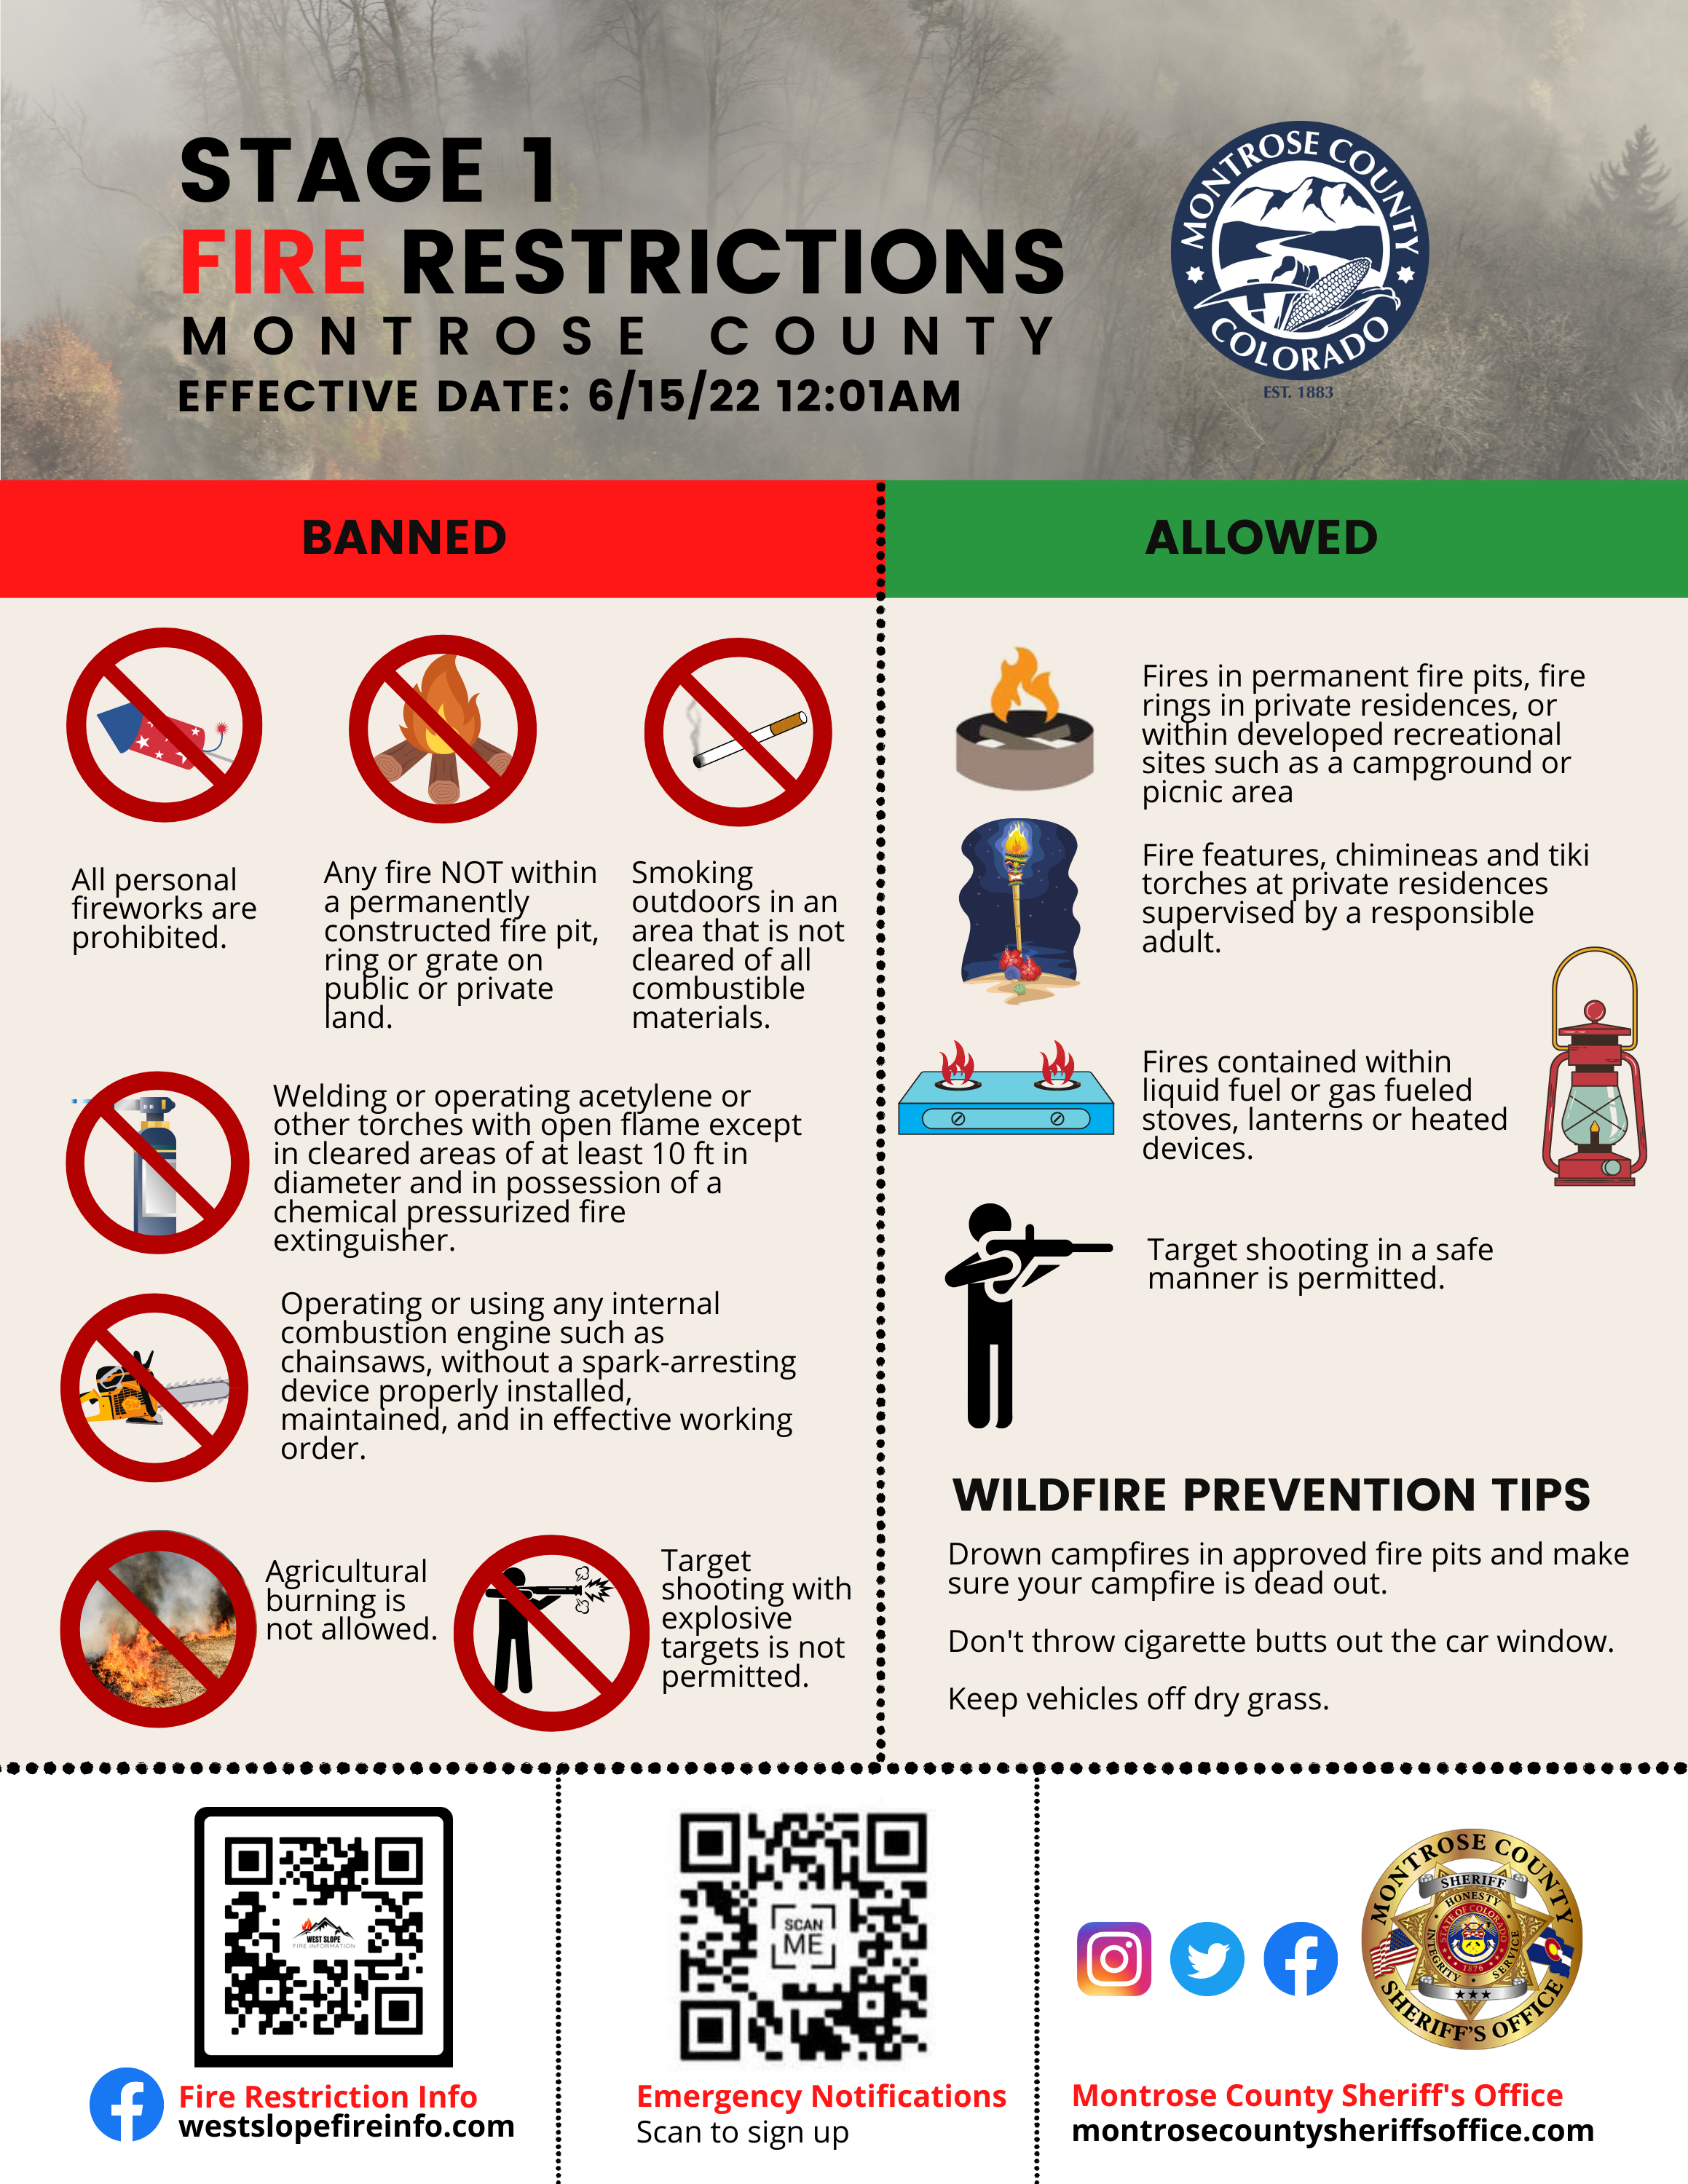 Fire Restrictions Stage 1 